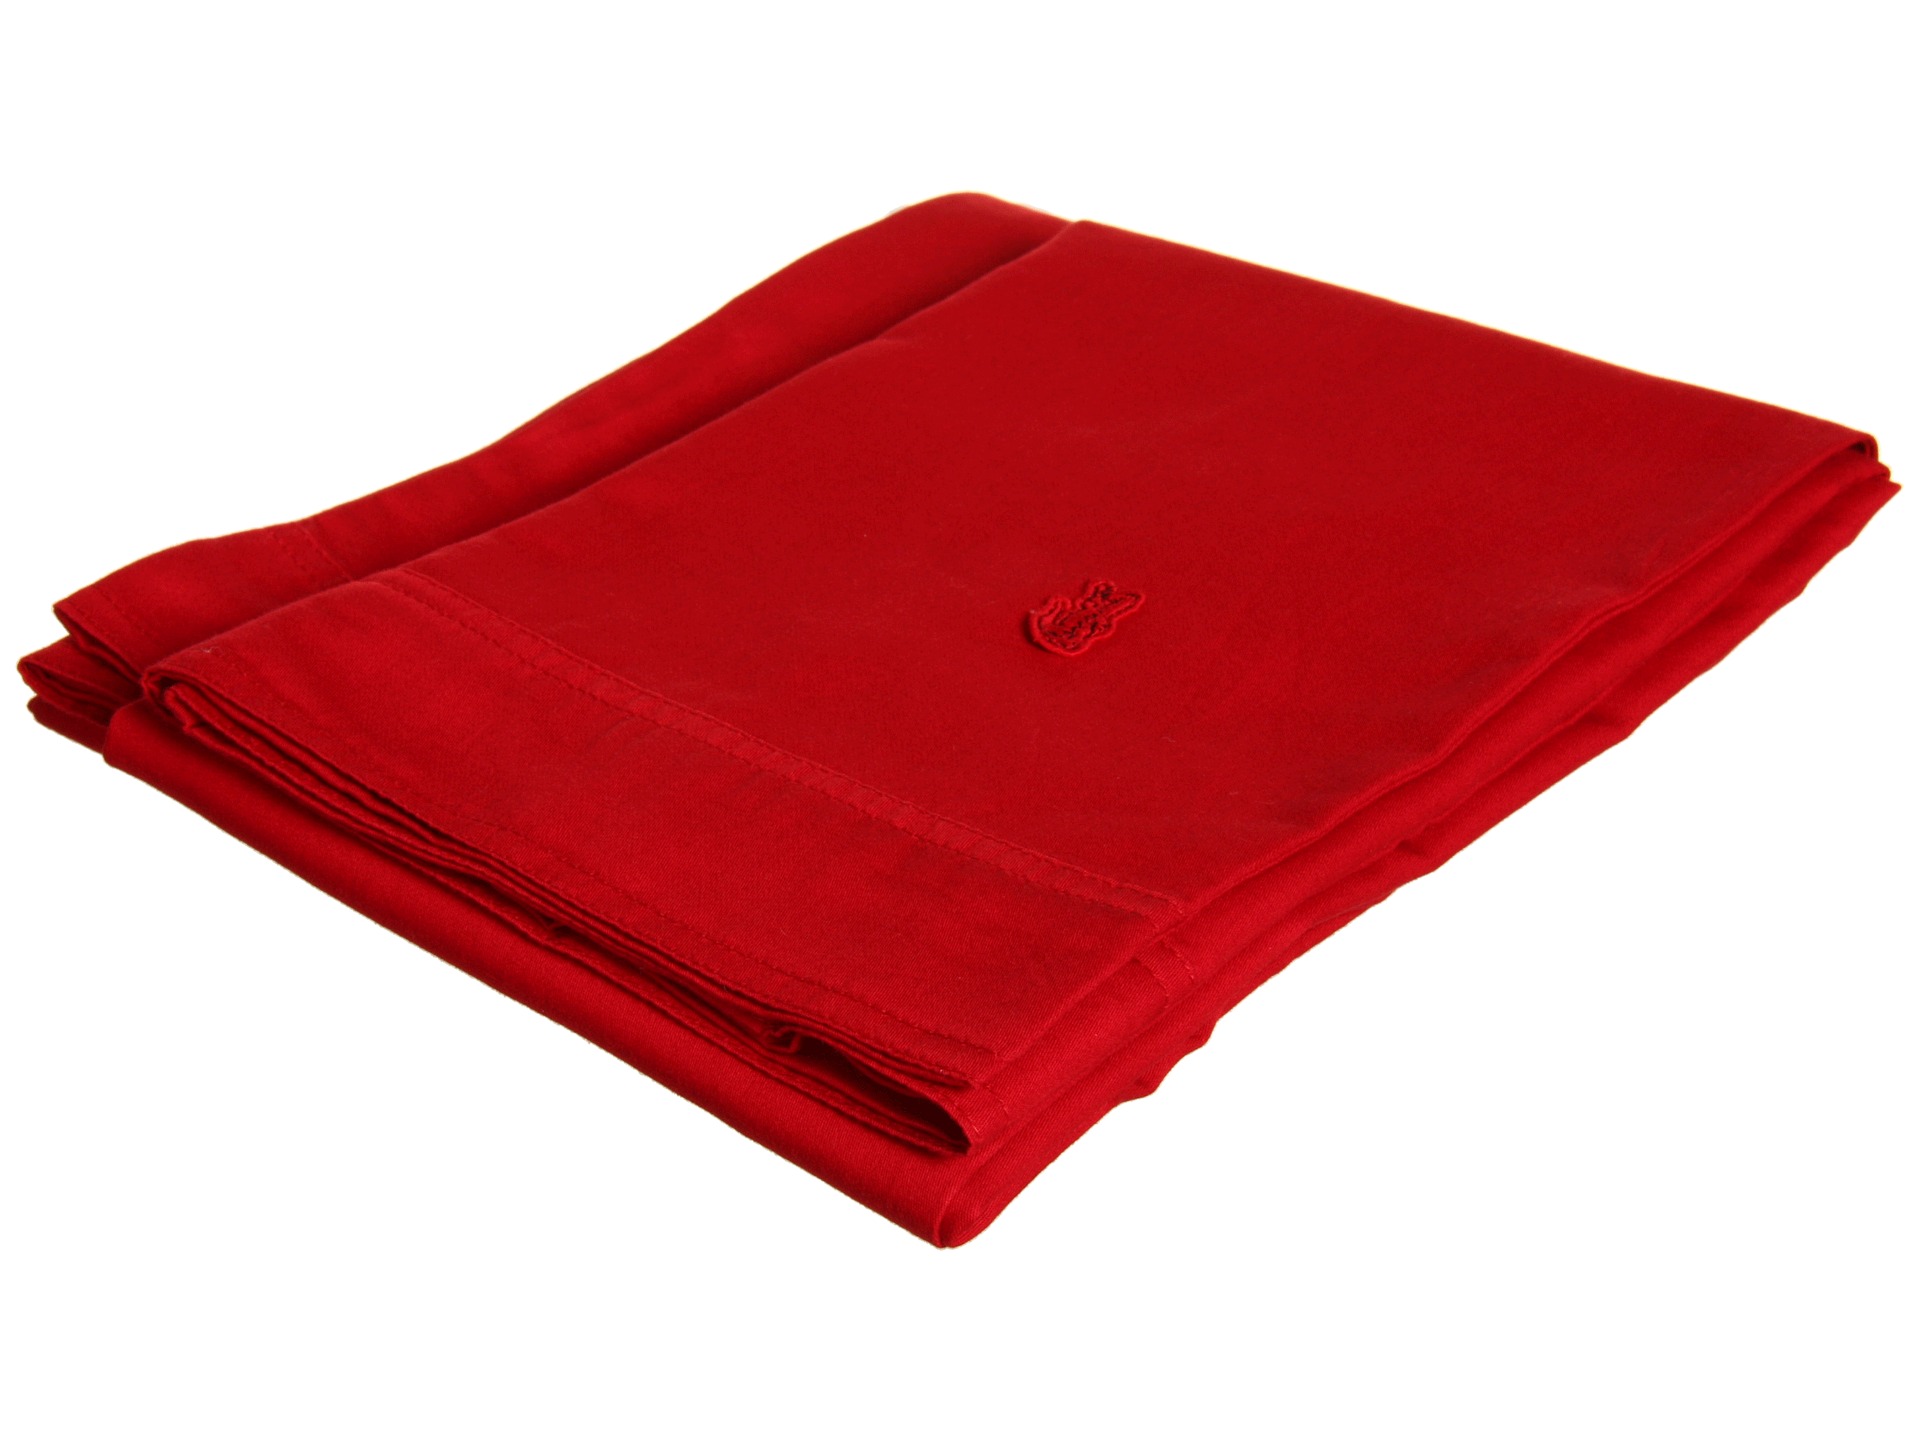 Lacoste Brushed Twill Pillow Cases   Standard Chili Pepper